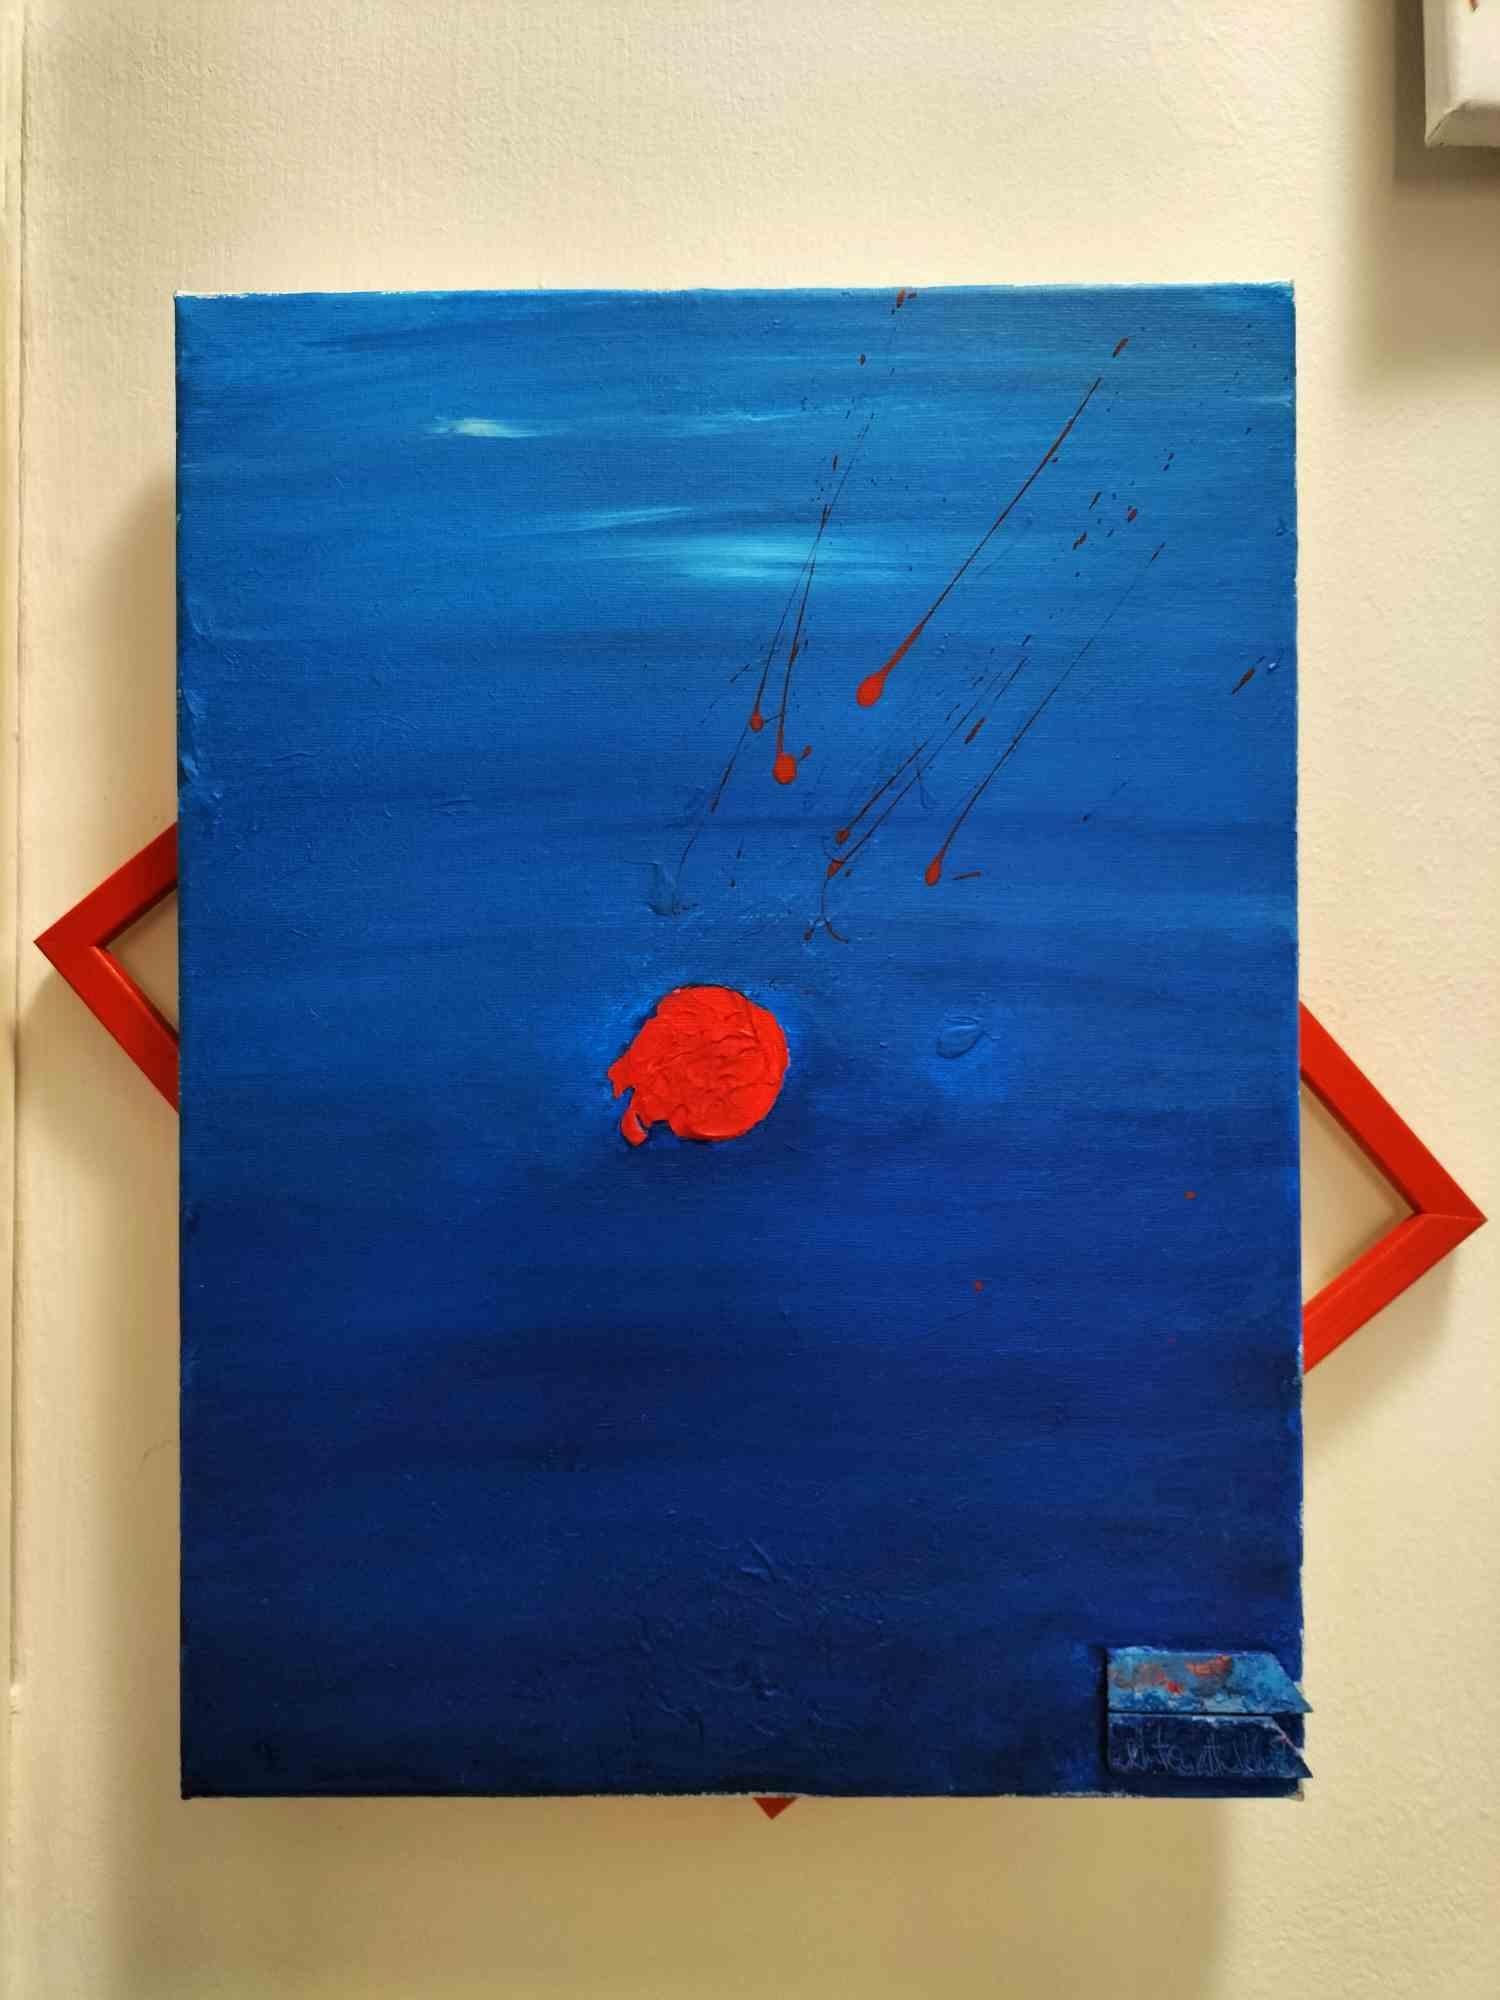 Threads is an acrylic painting on canvas 40x30, realized by Antonietta Valente in 2023.

Hand-signed. Perfect conditions. Certificate of authenticity provided by the artist.

Red vivid threads illuminate the deep blue ocean. The energy of contrasts